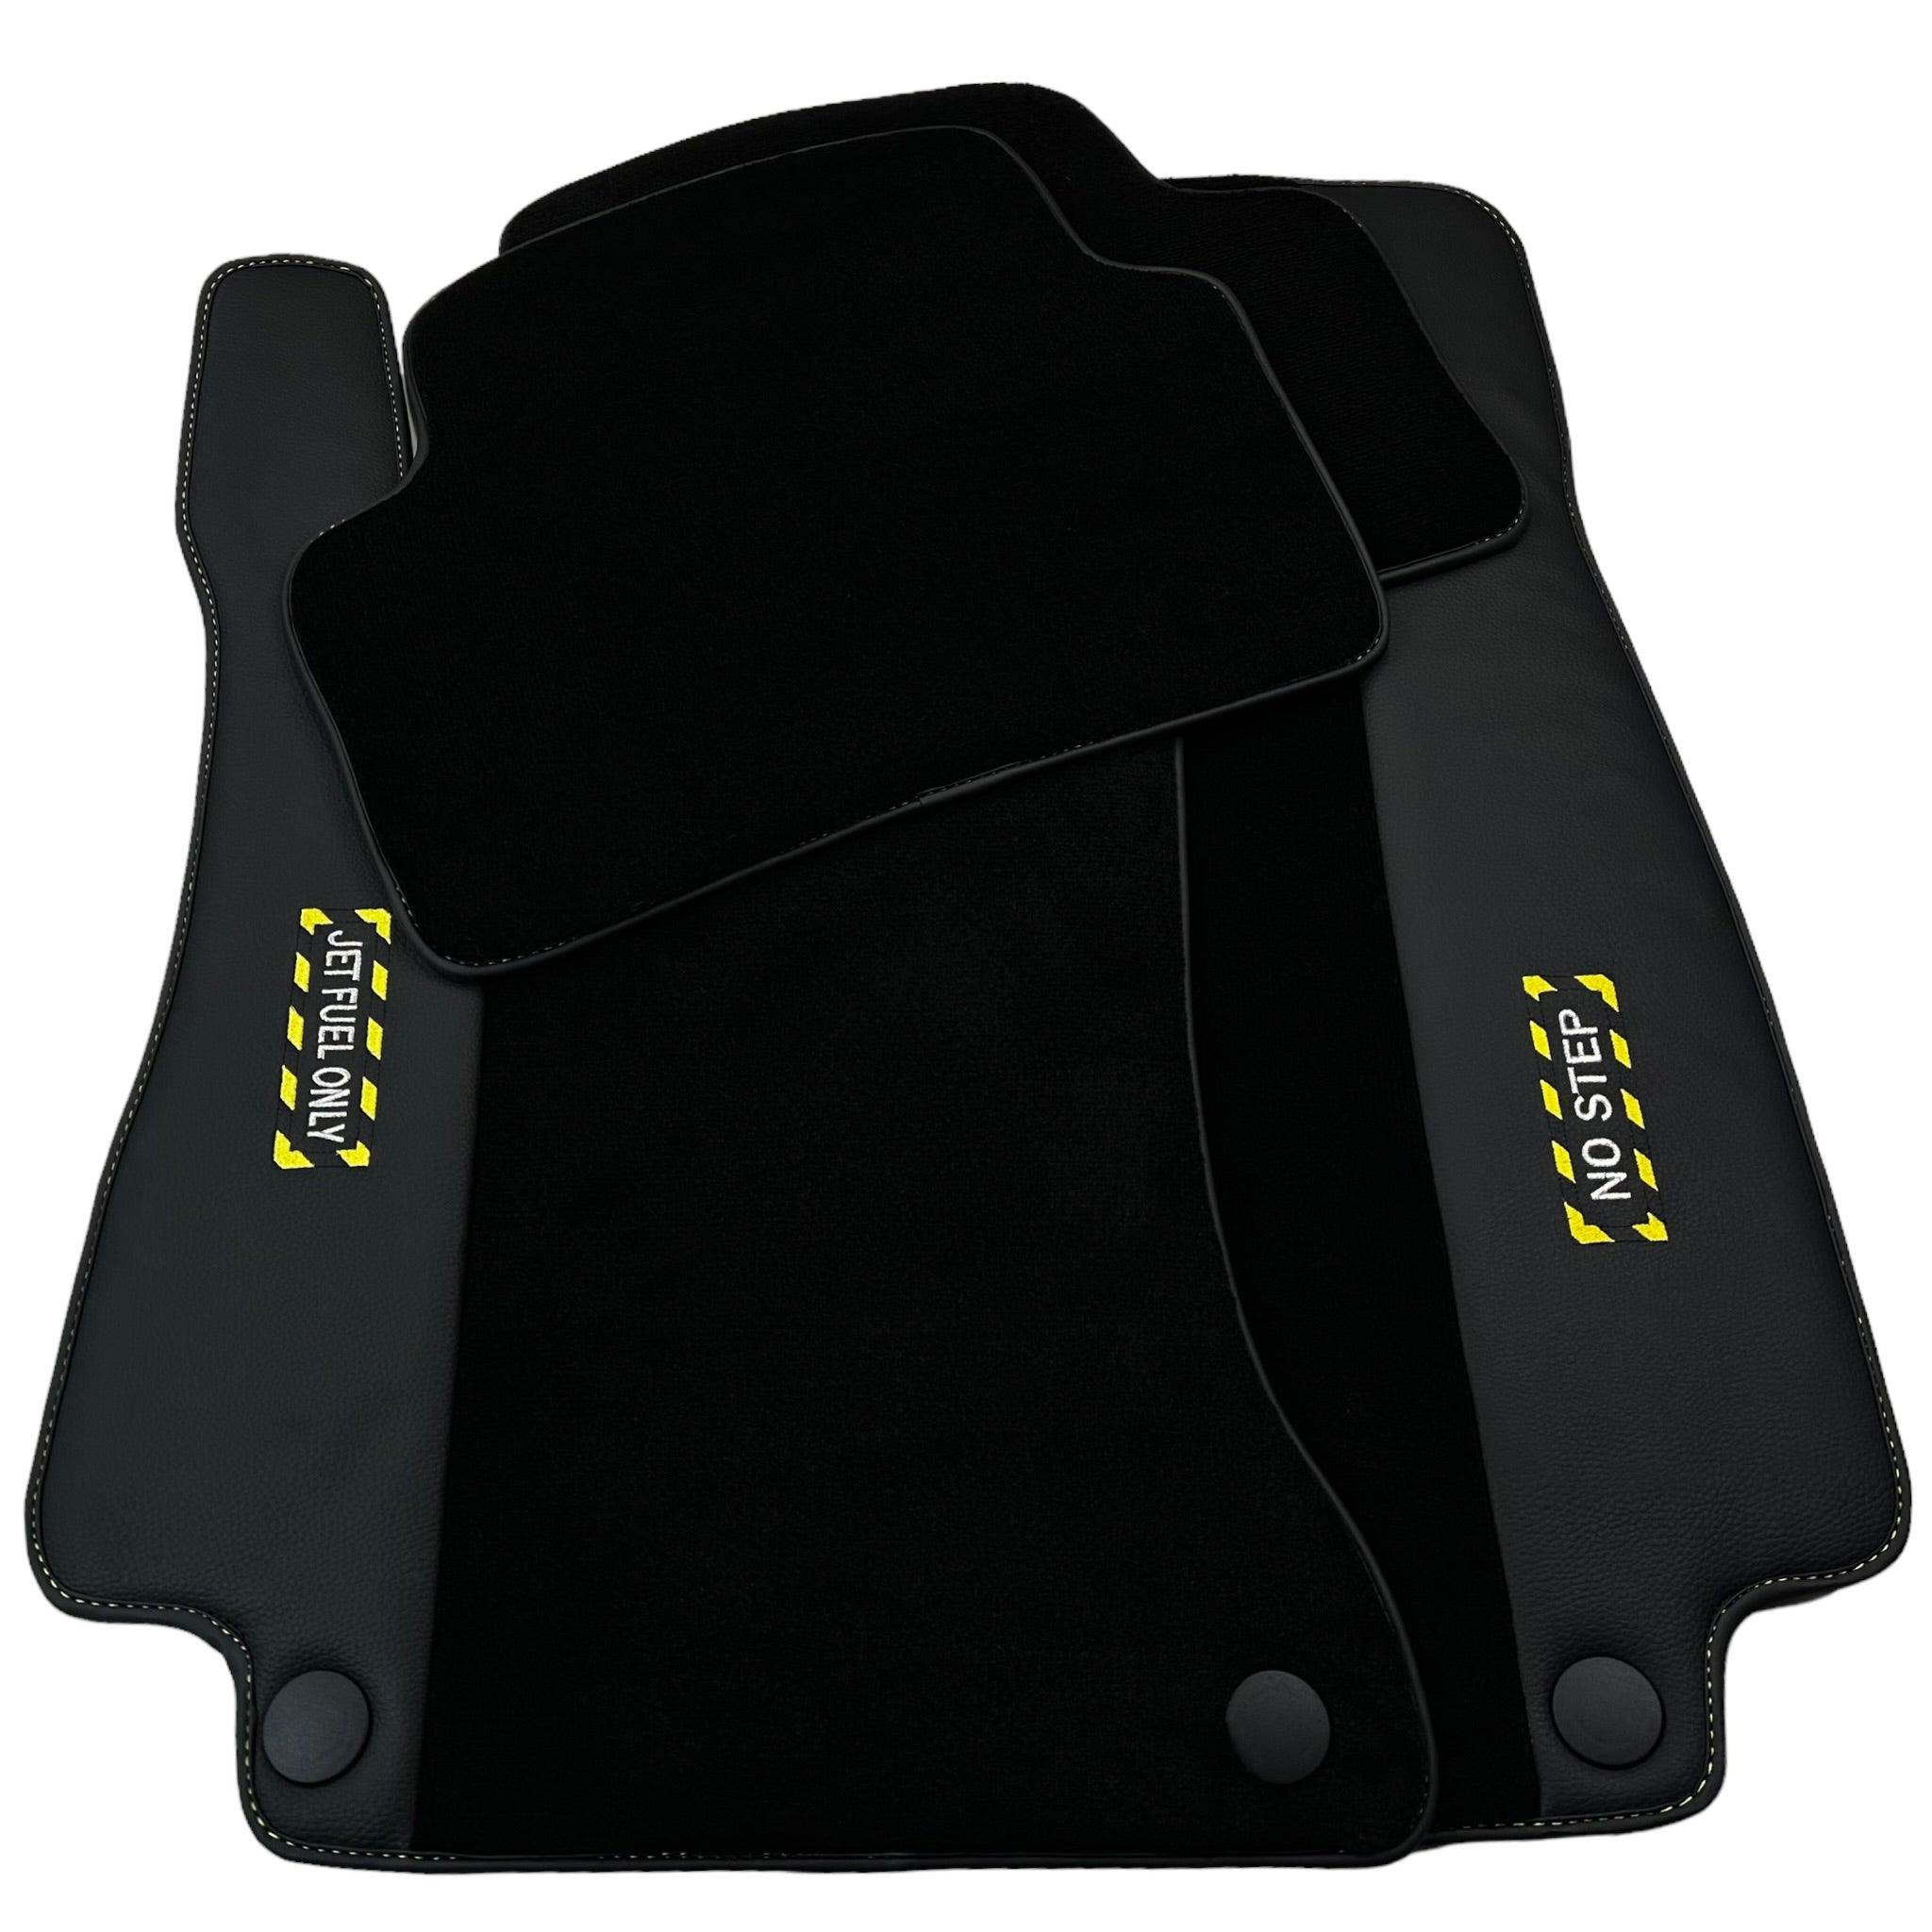 Black Floor Mats For Mercedes Benz E-Class C207 Coupe (2009-2013) | Fighter Jet Edition